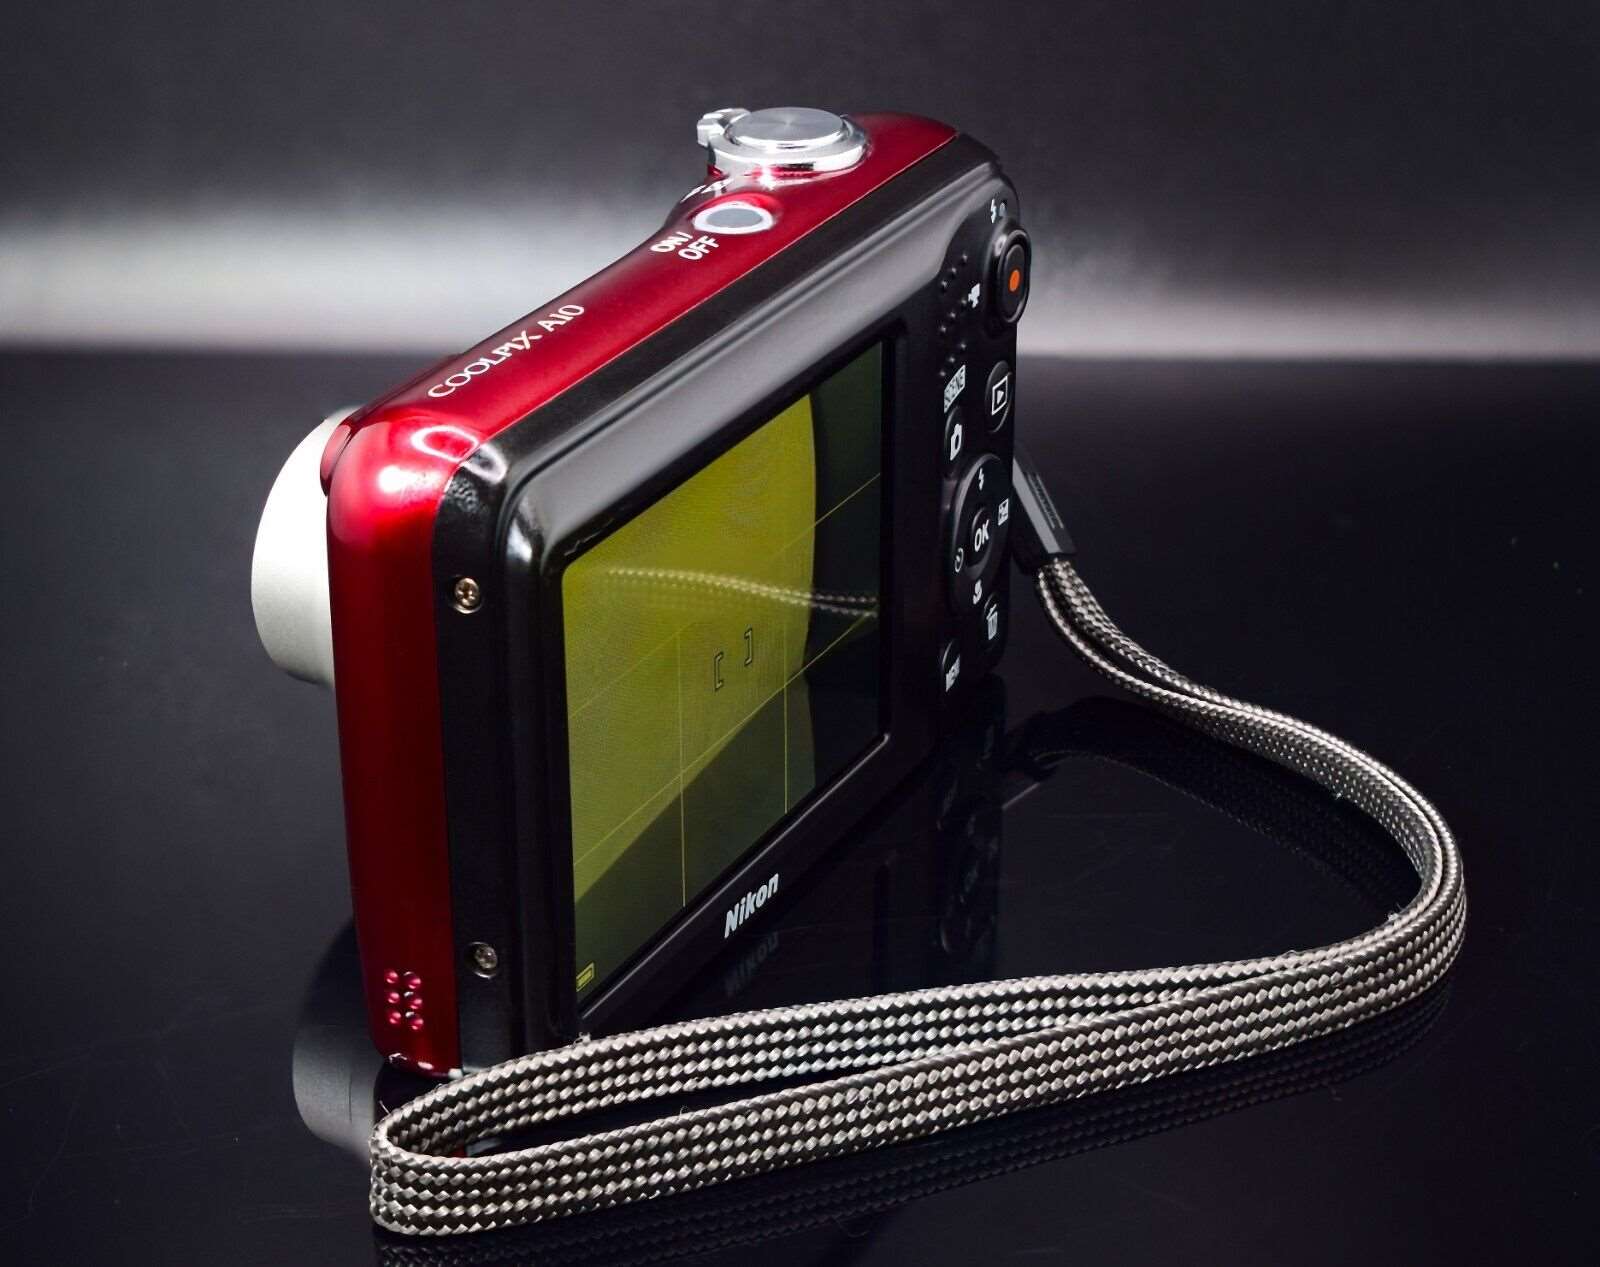 Nikon COOLPIX Affinity COOLPIX A10 RED-